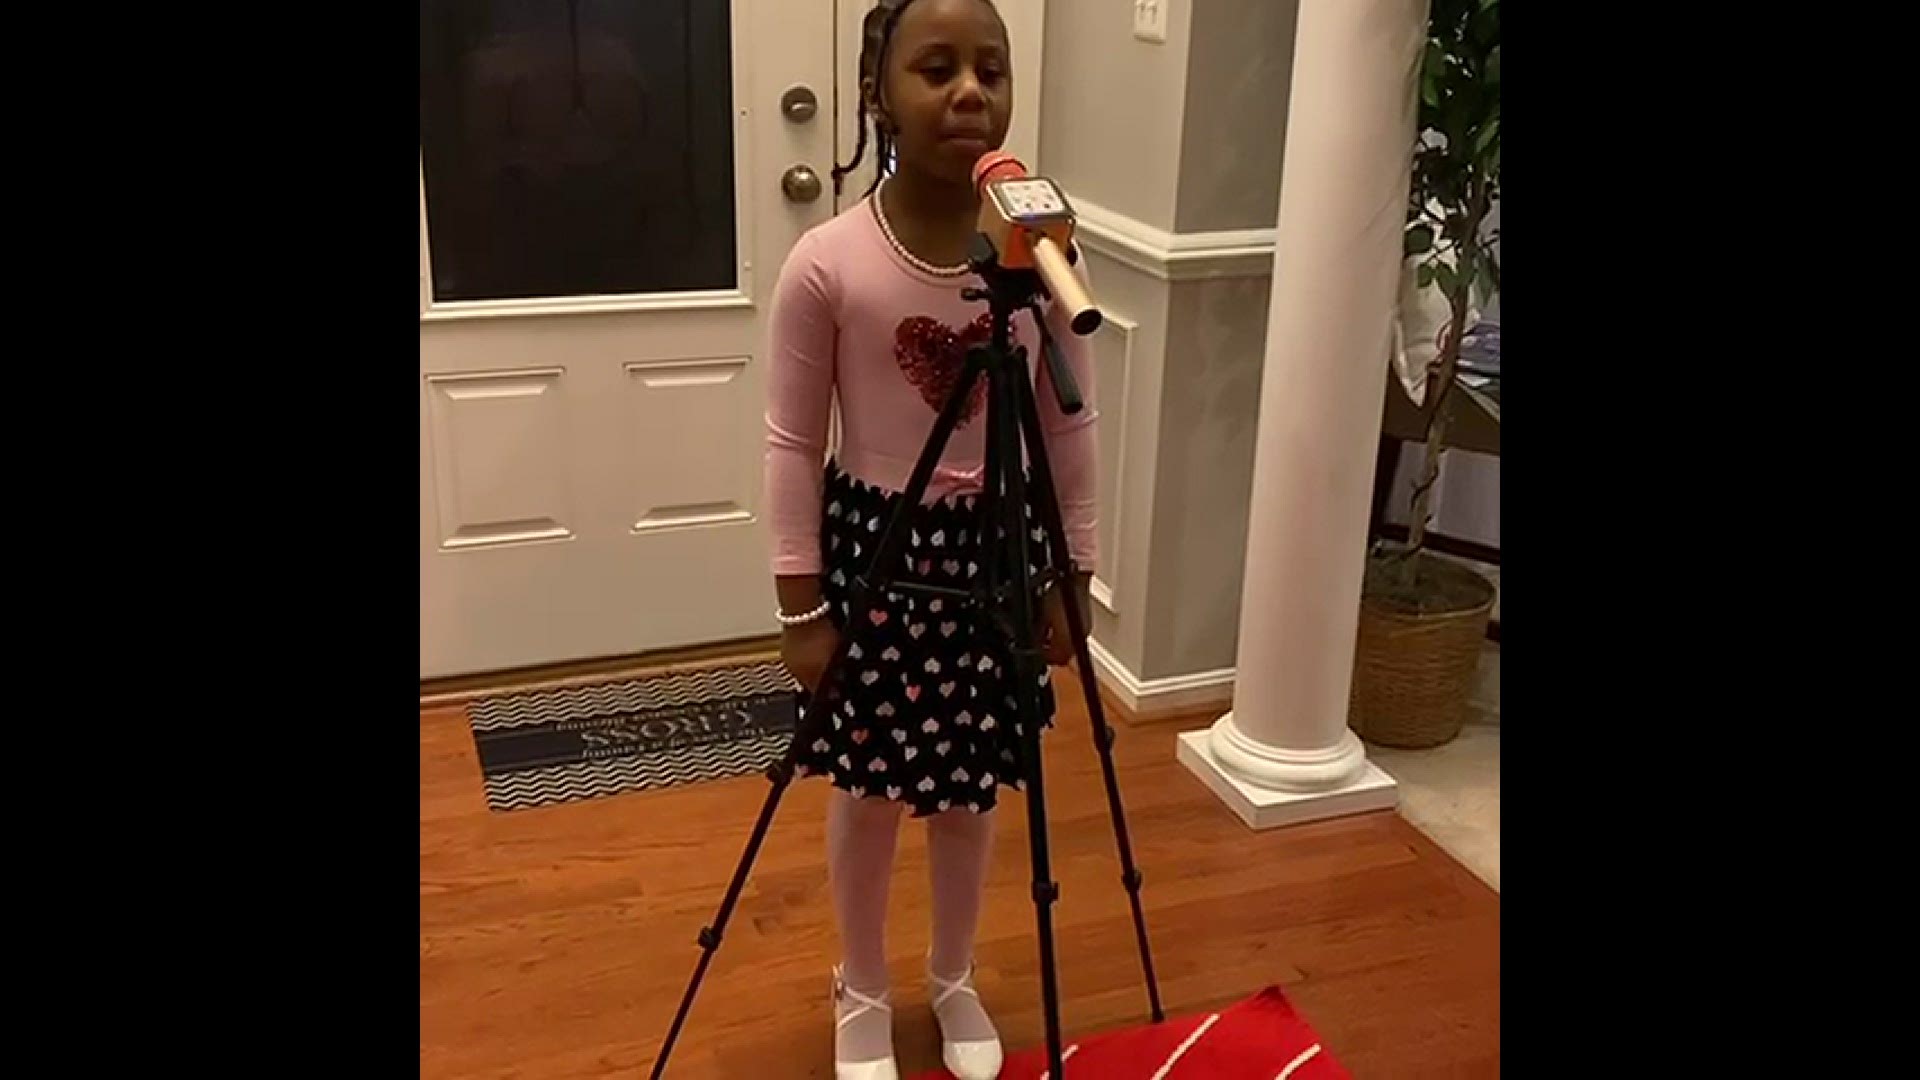 Nia Gross sent her class a special Valentine's Day message